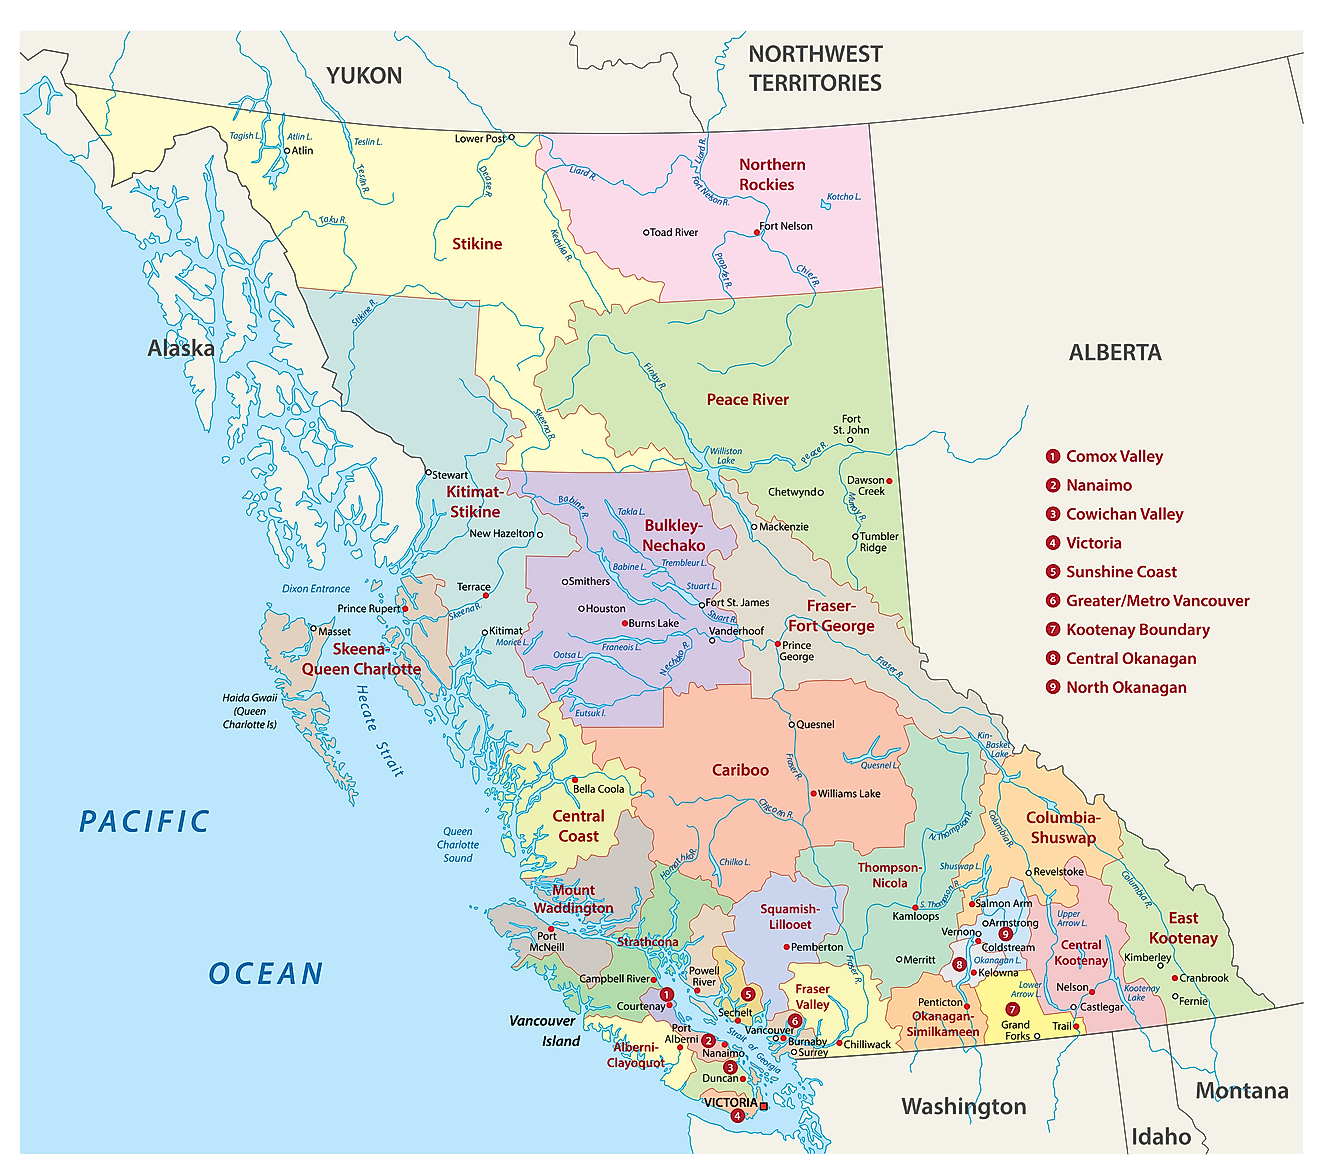 Geography of Vancouver, British Columbia, Canada